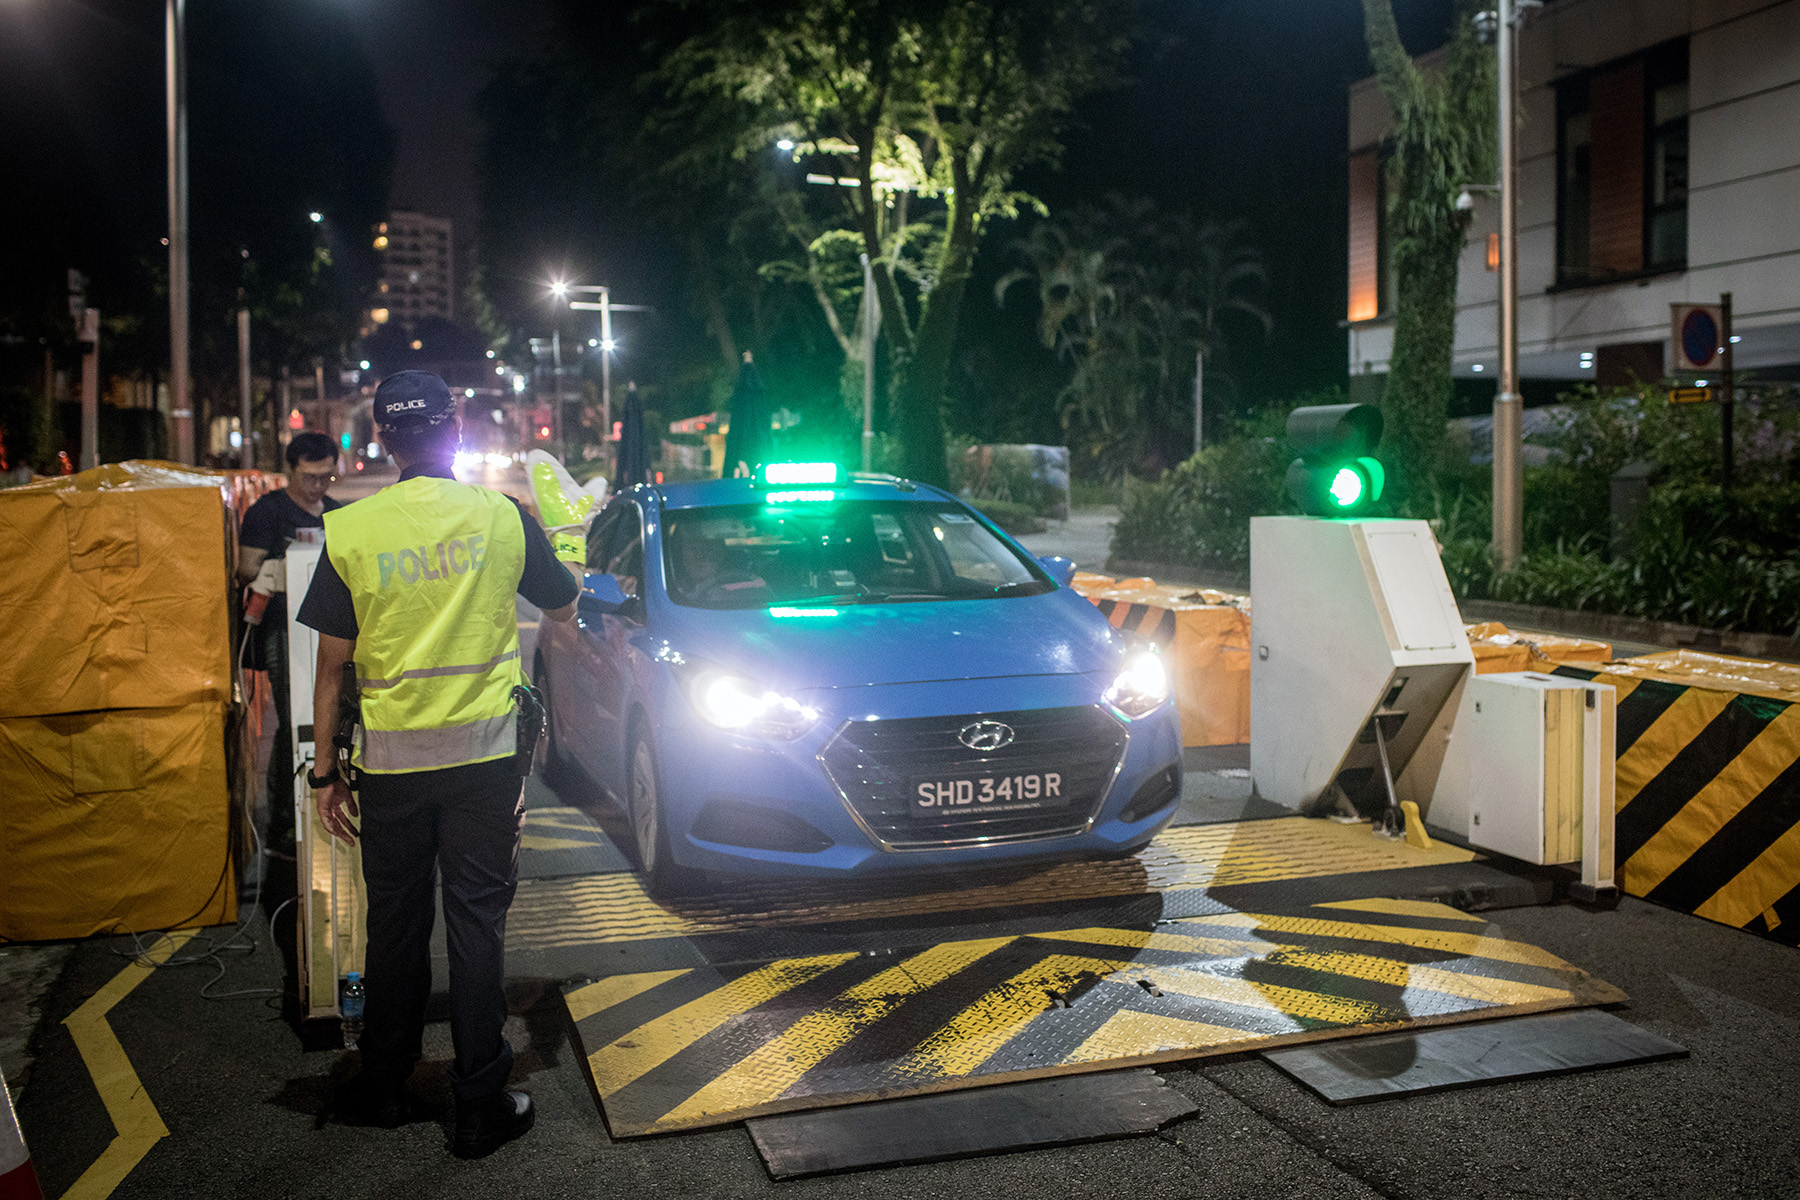 A police officer checks vehicles before they pass through a checkpoint. It is night.